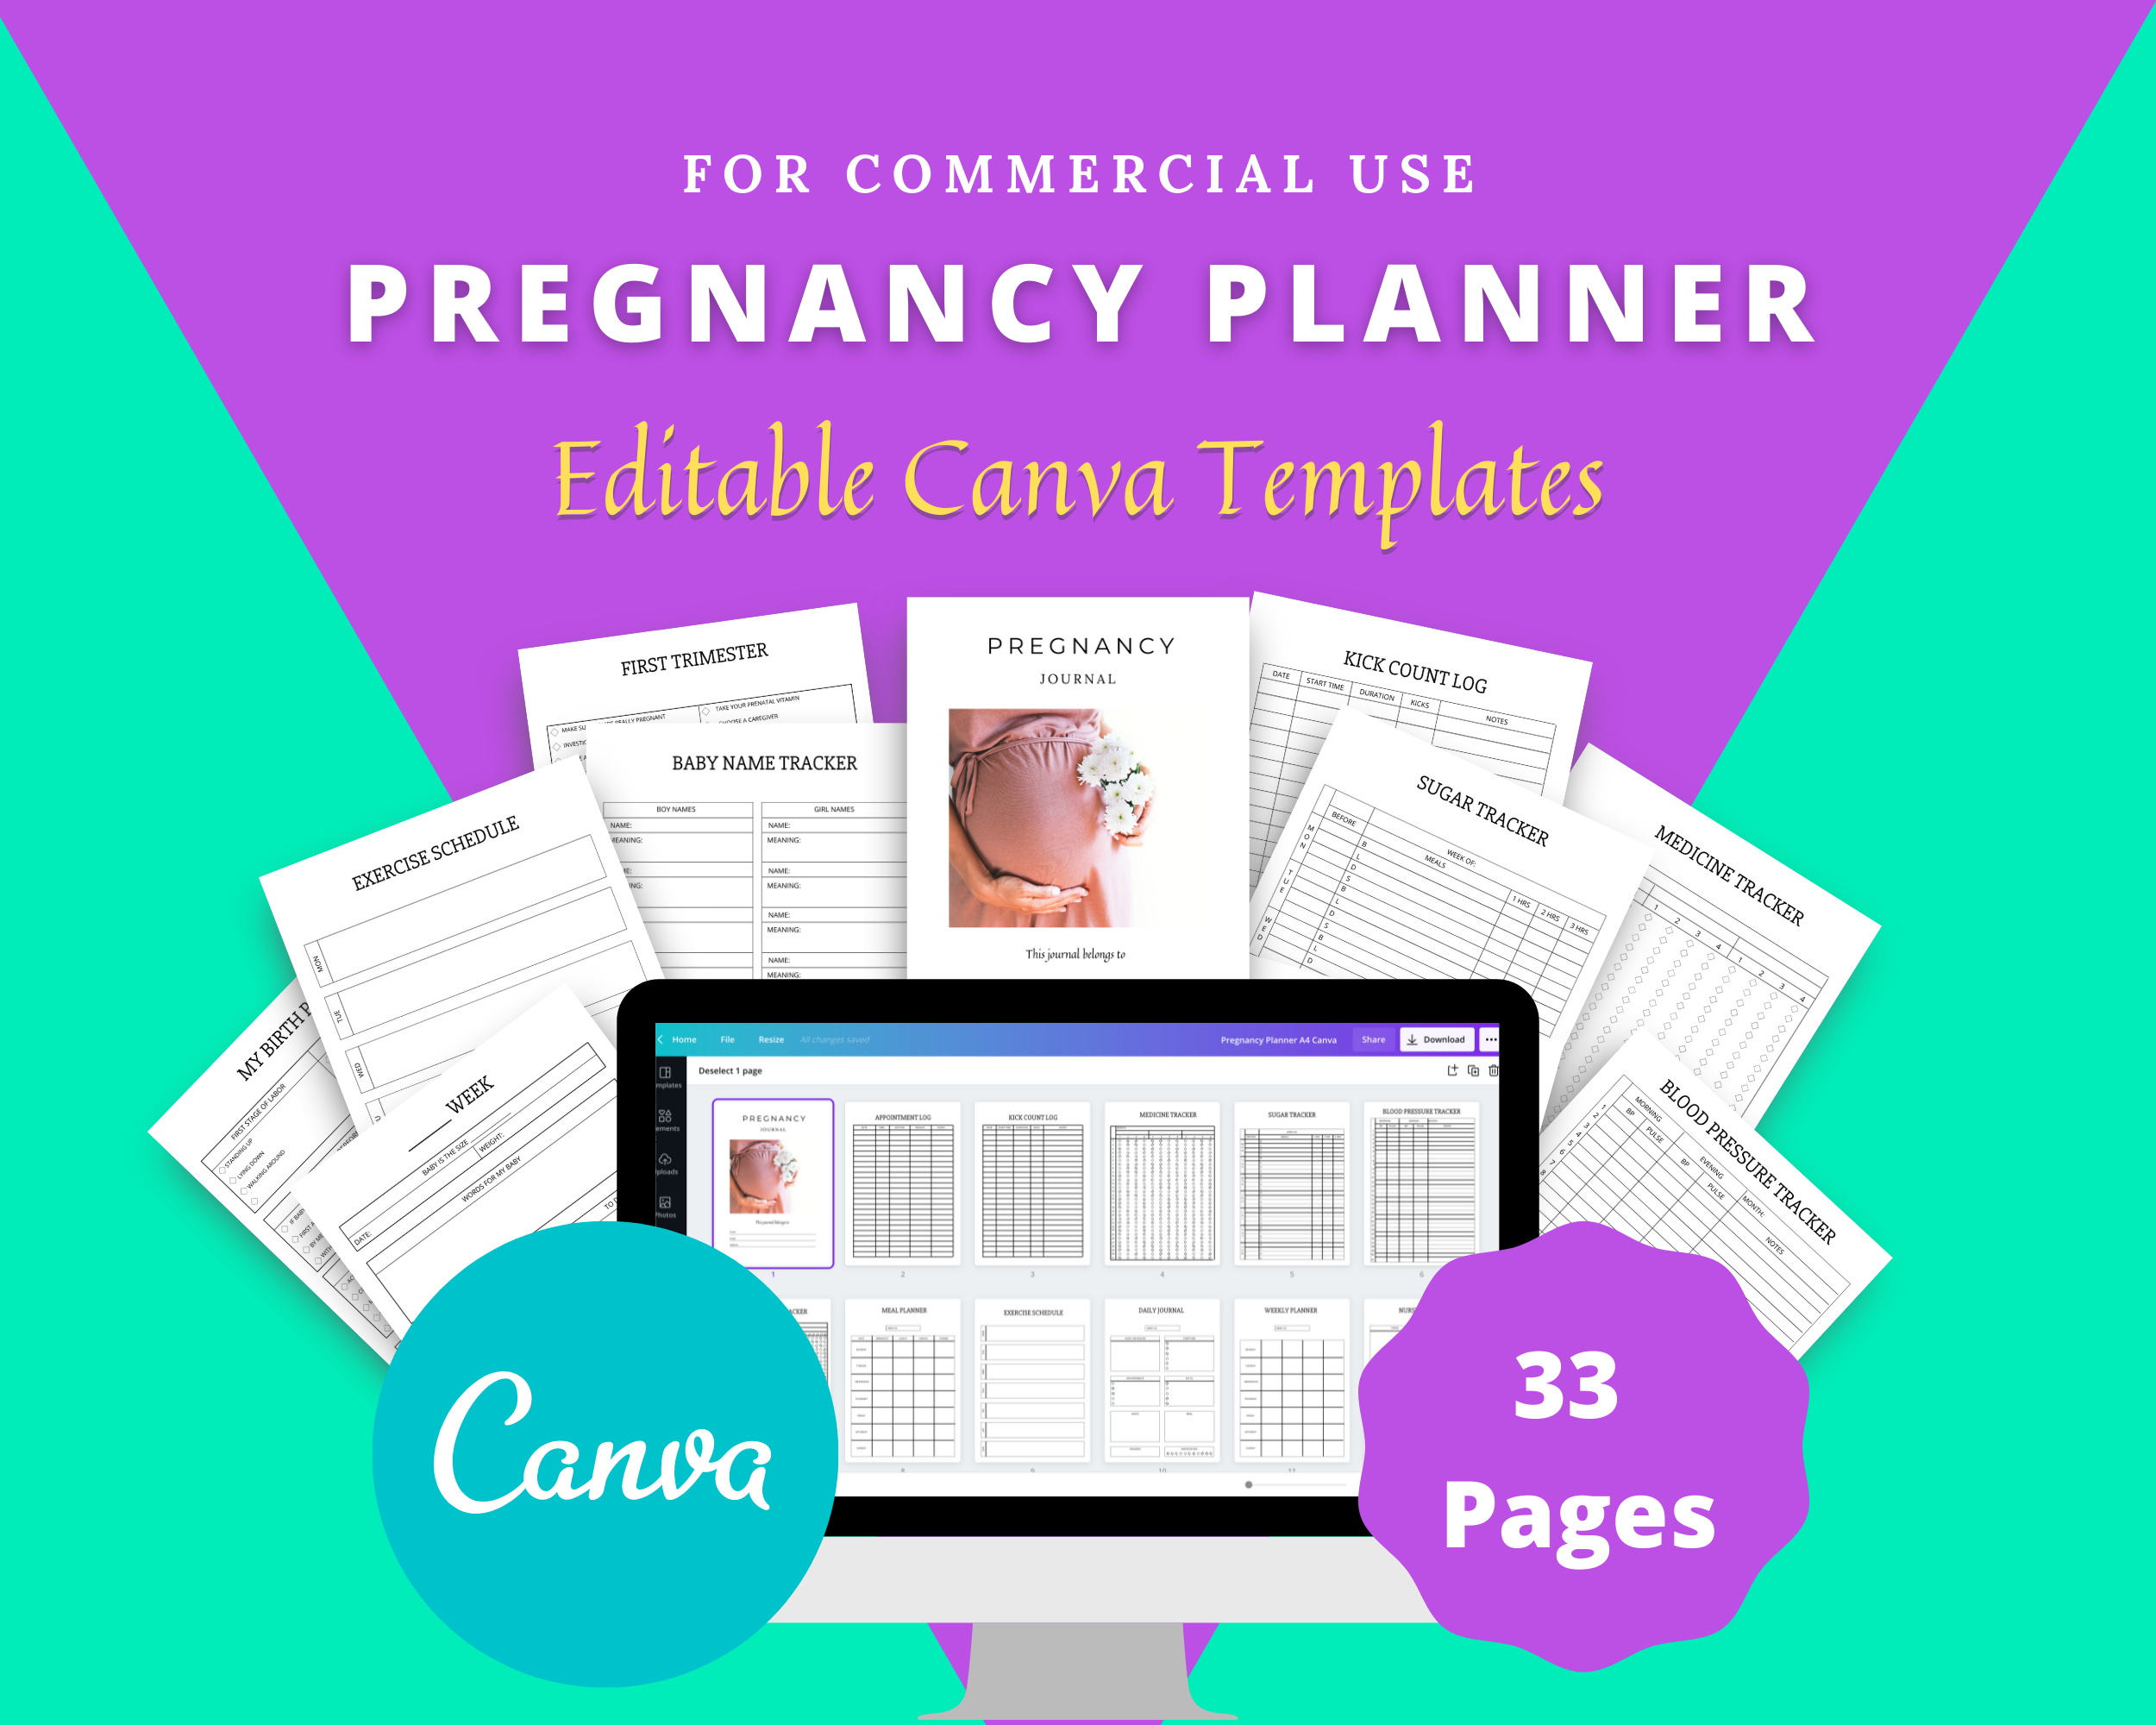 Editable Pregnancy Planner Templates in Canva | New Mom Planner Templates | Commercial Use